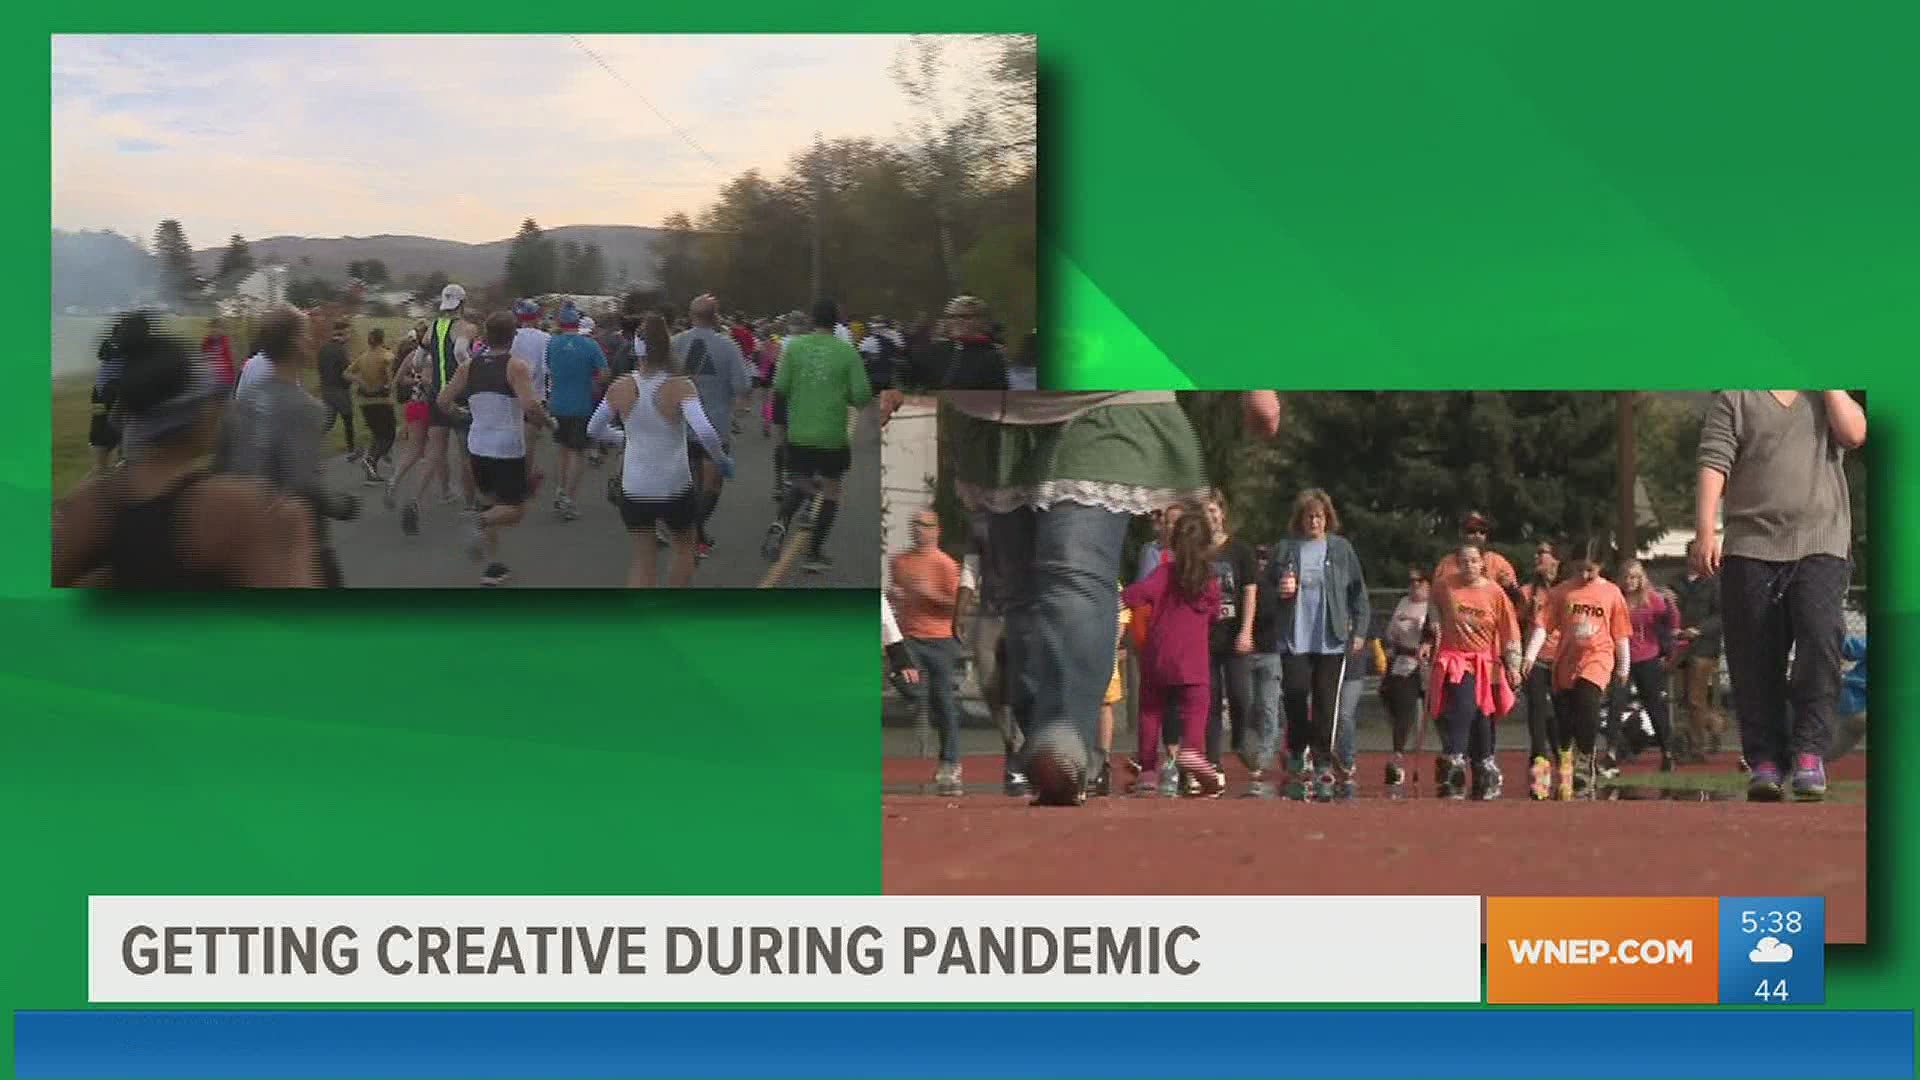 This weekend would normally be a big one in Scranton for runners, but due to the pandemic, the Steamtown Marathon & Ryan’s Run All abilities Walk have been canceled.